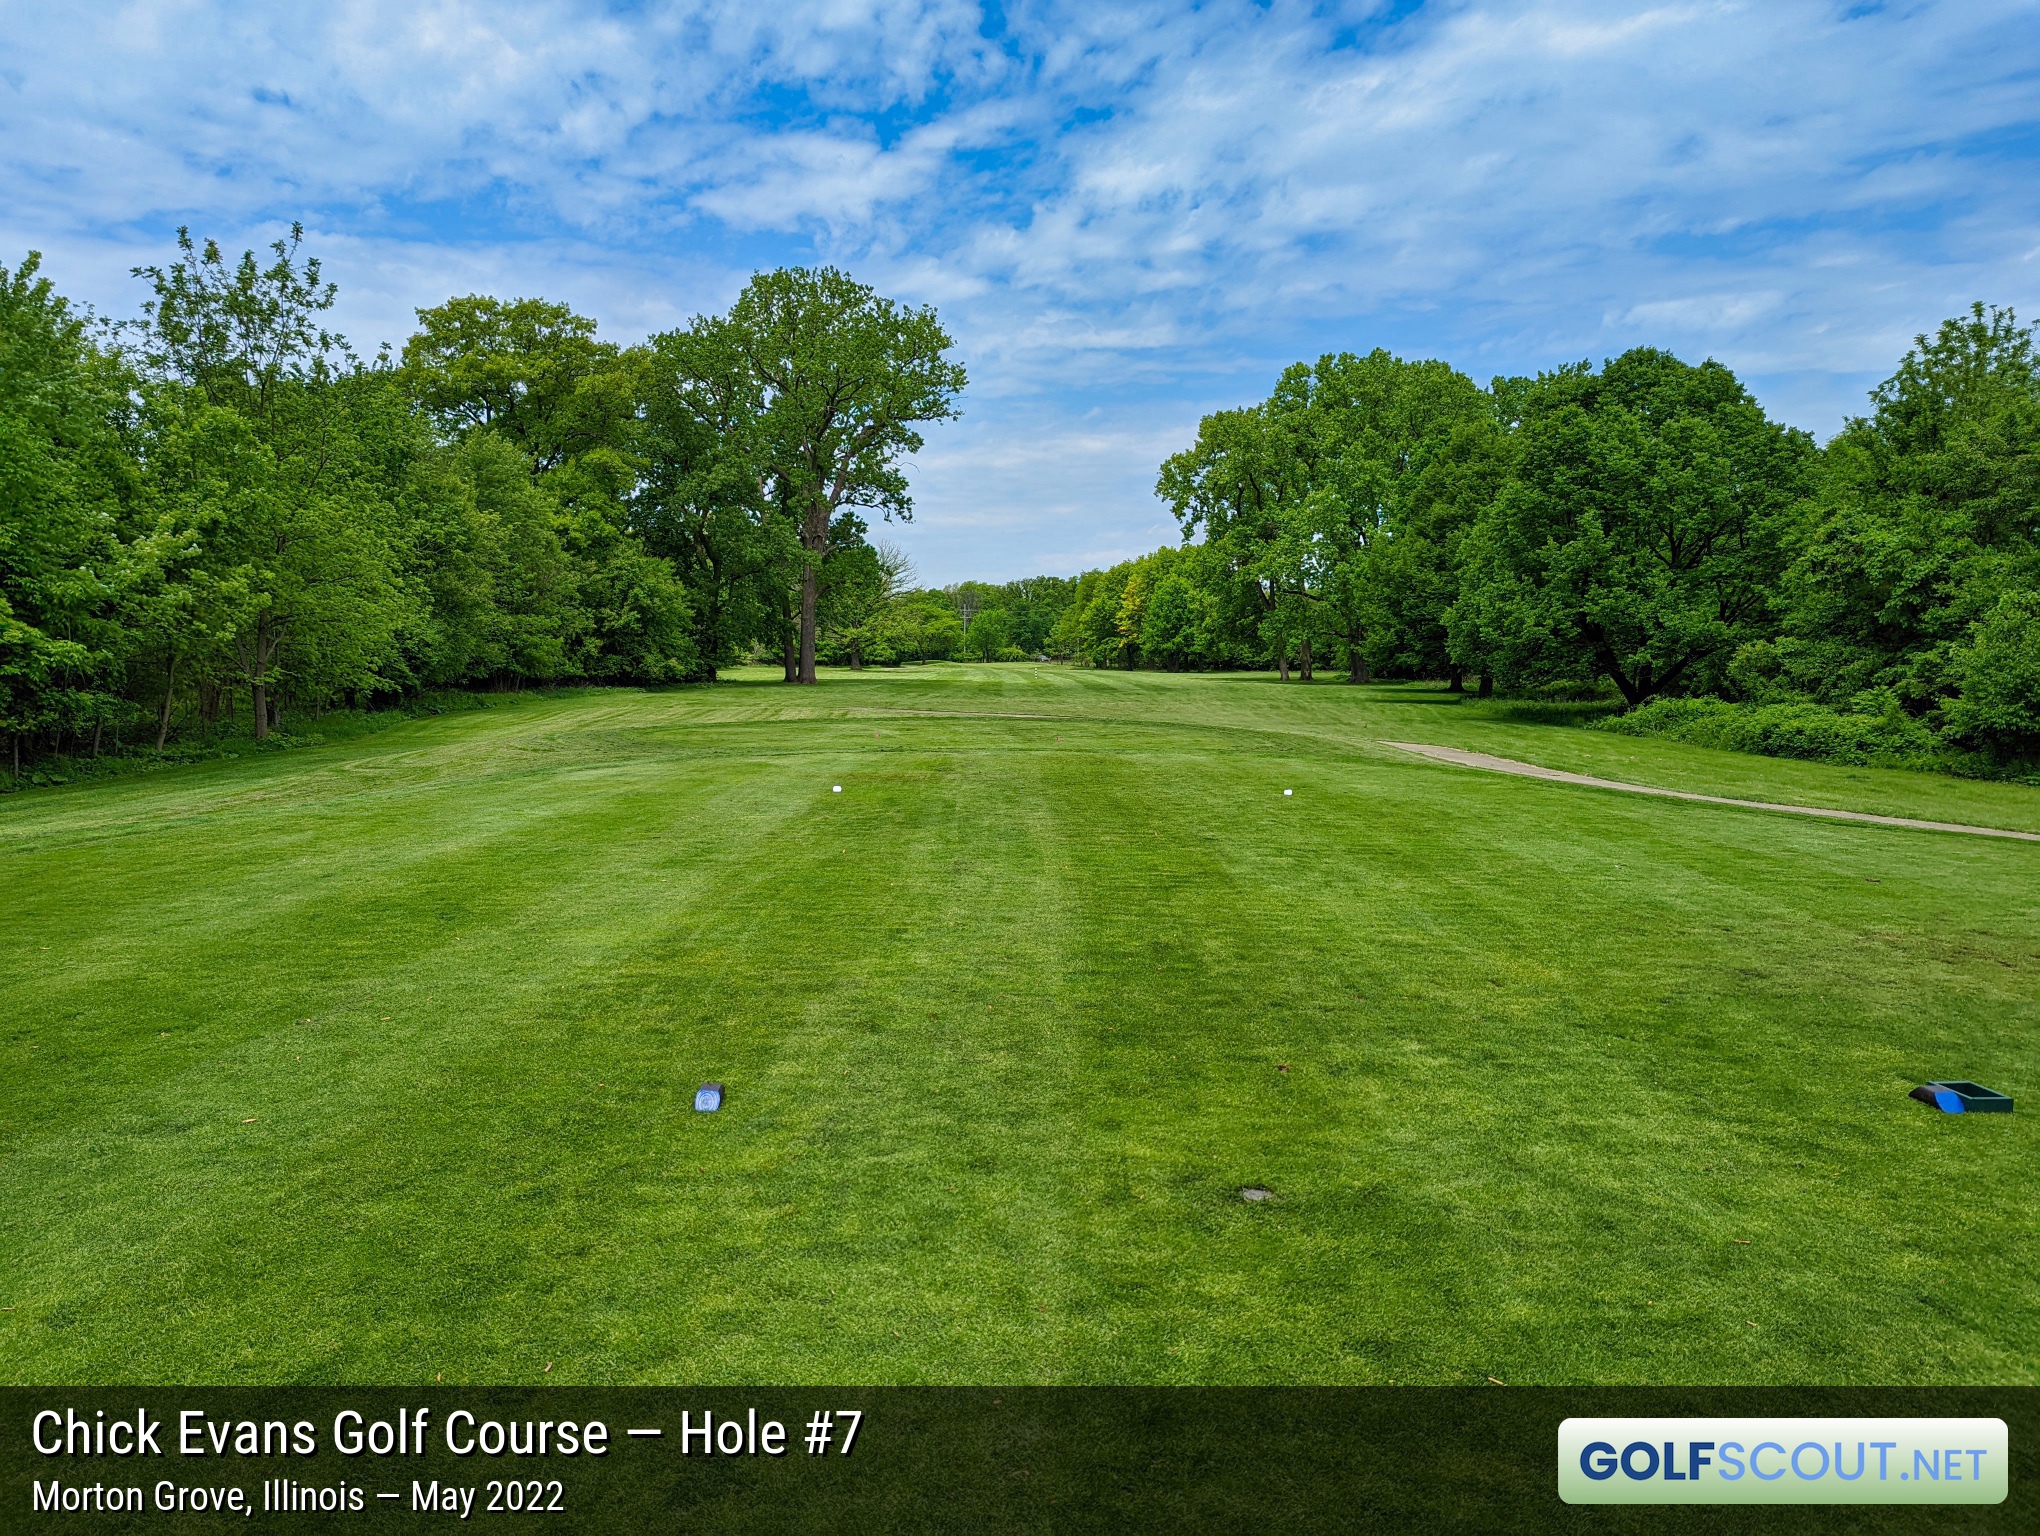 Photo of hole #7 at Chick Evans Golf Course in Morton Grove, Illinois. 